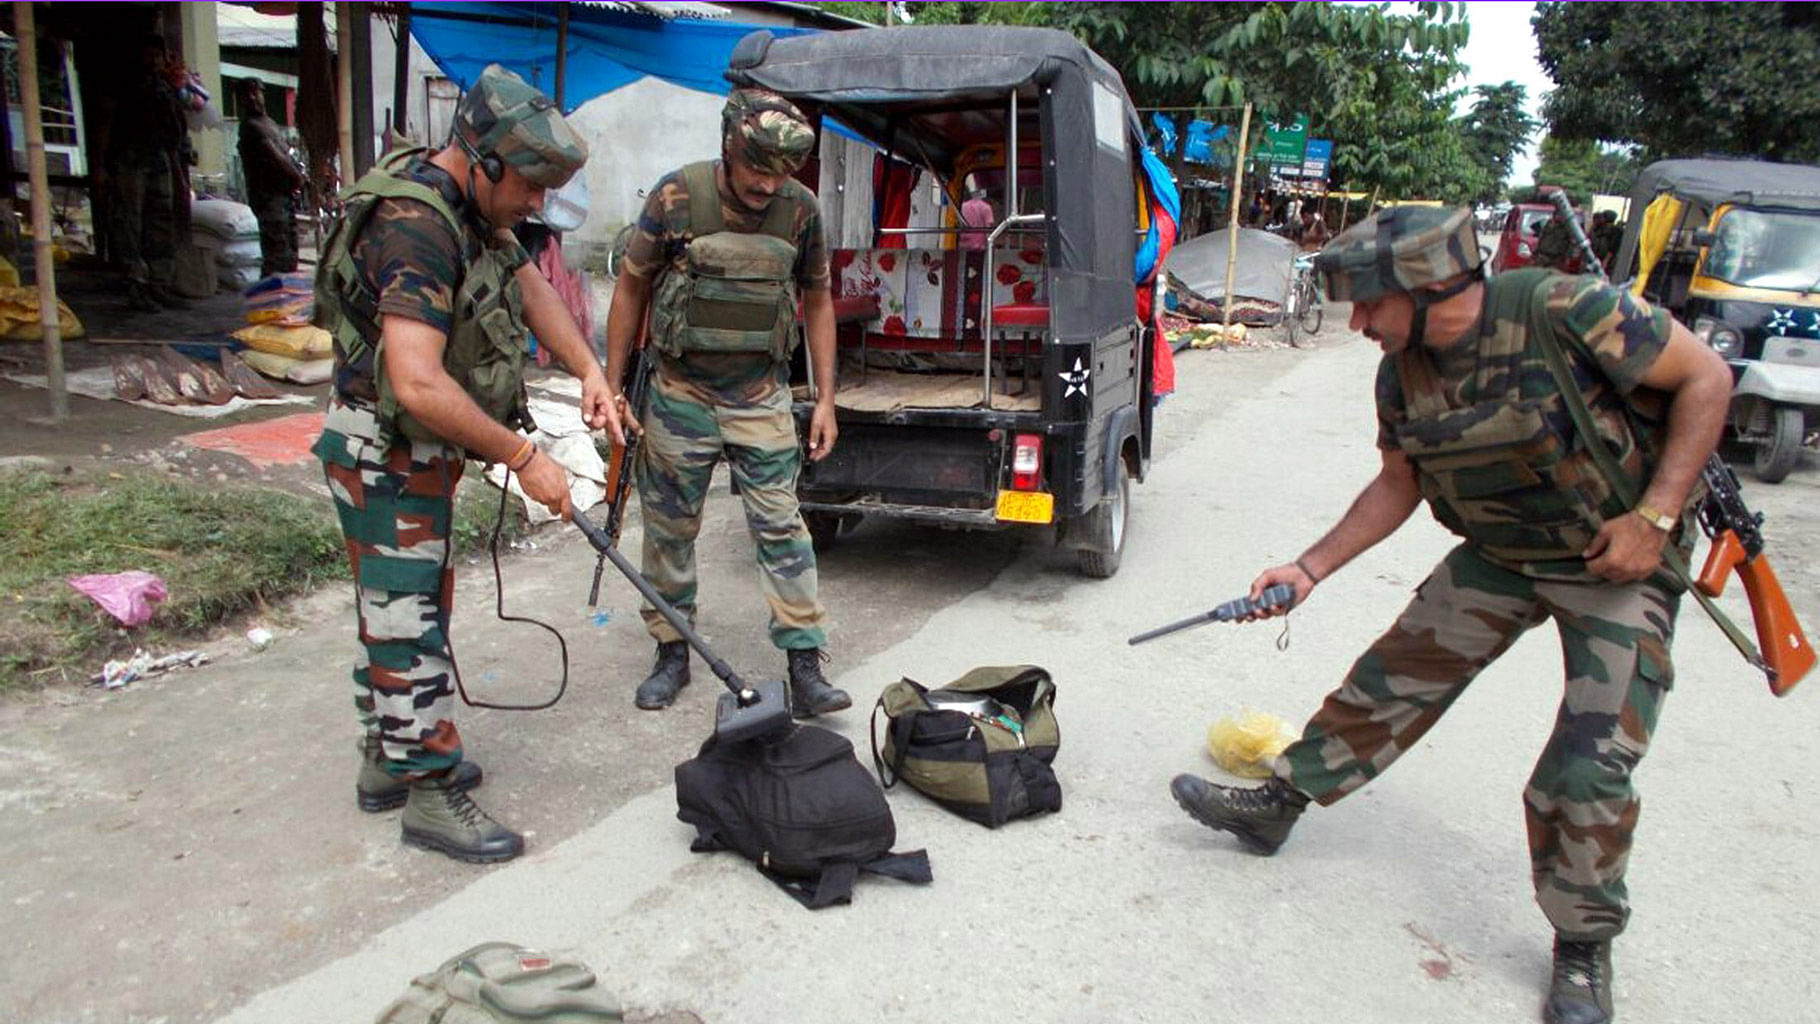 

Army personnel check bags left by a group of militants after the Kokrajhar terror attack. (Photo: IANS)